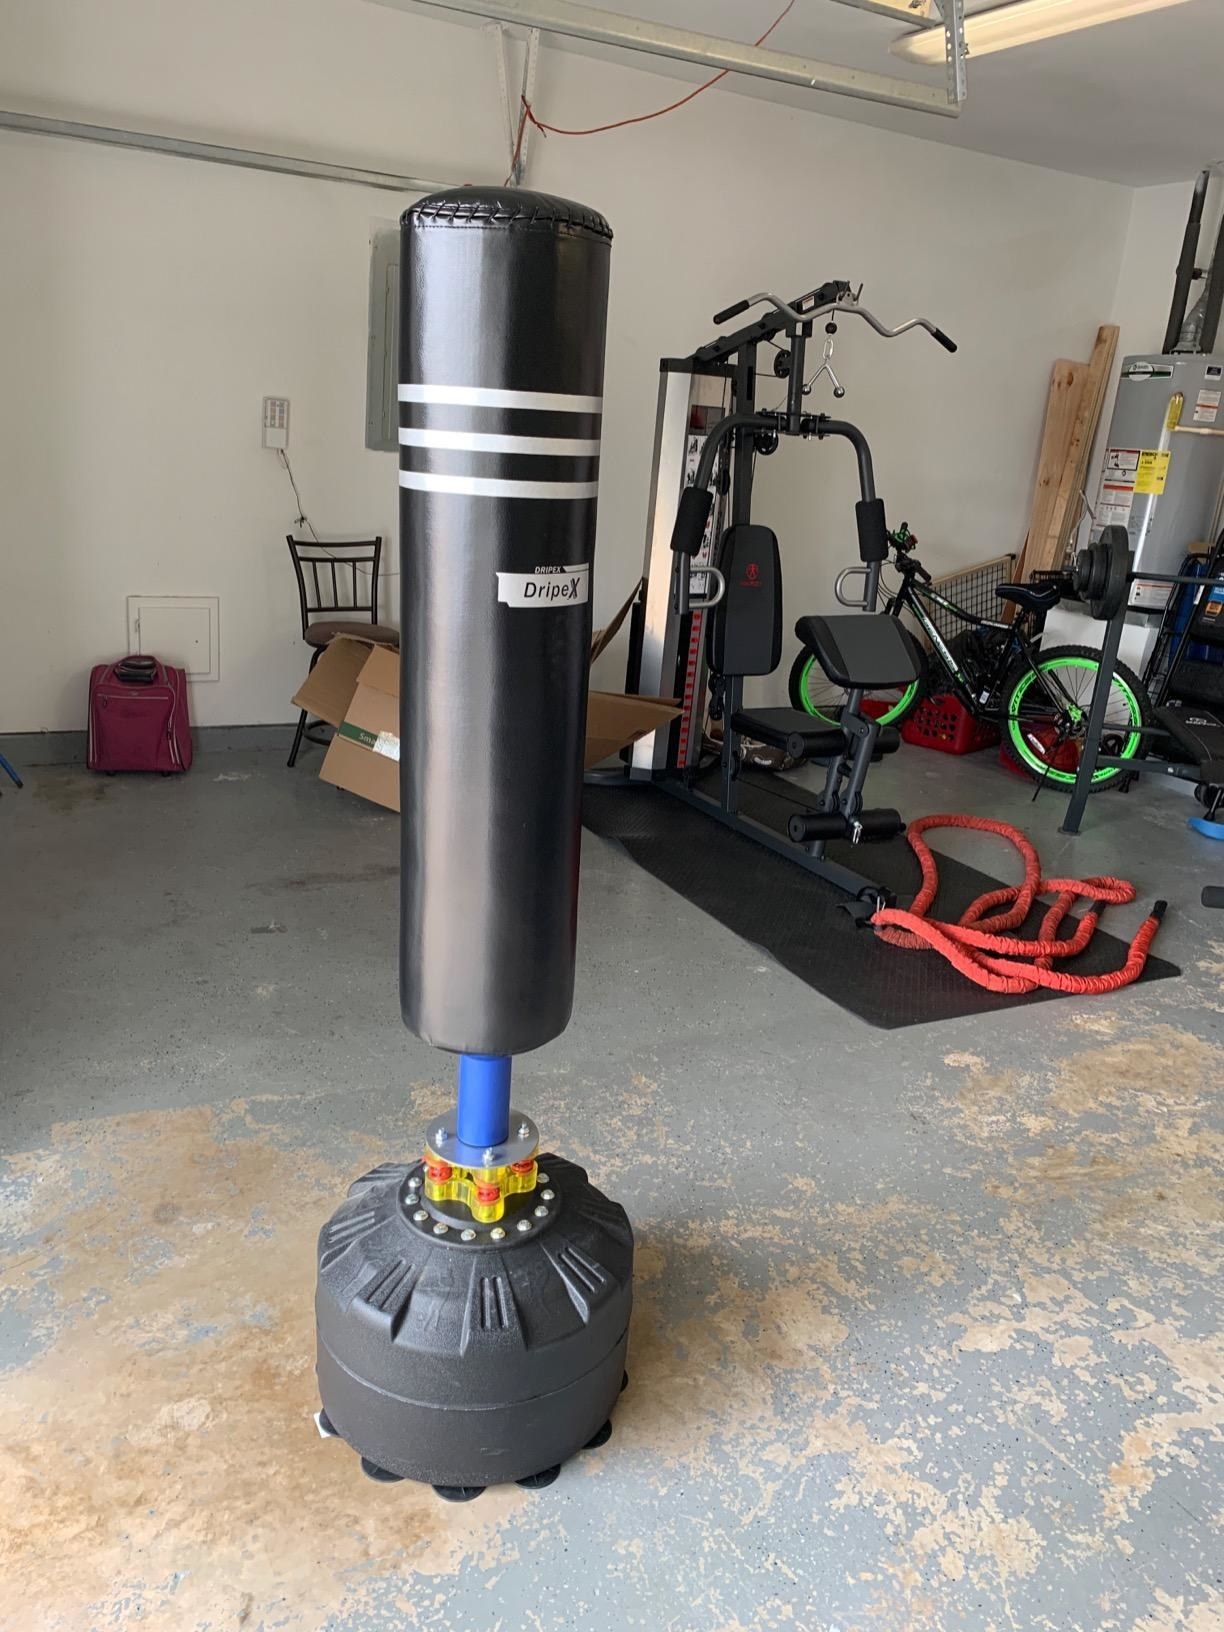 A reviewer&#x27;s photo of the punching bag in their home gym